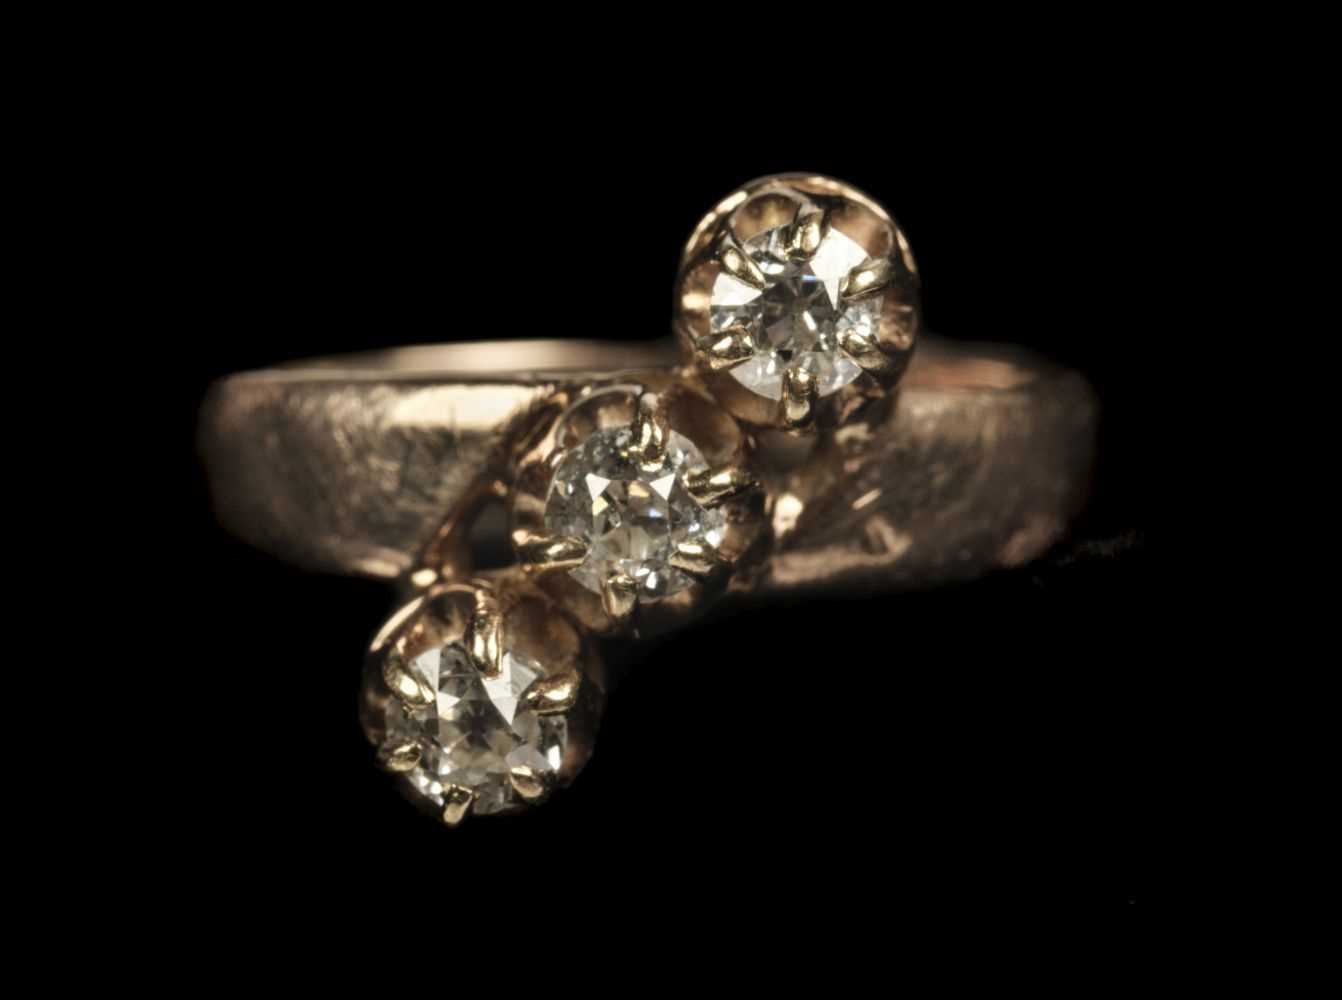 Lot 22 - Ring. Rose gold and 3-stone diamond ring